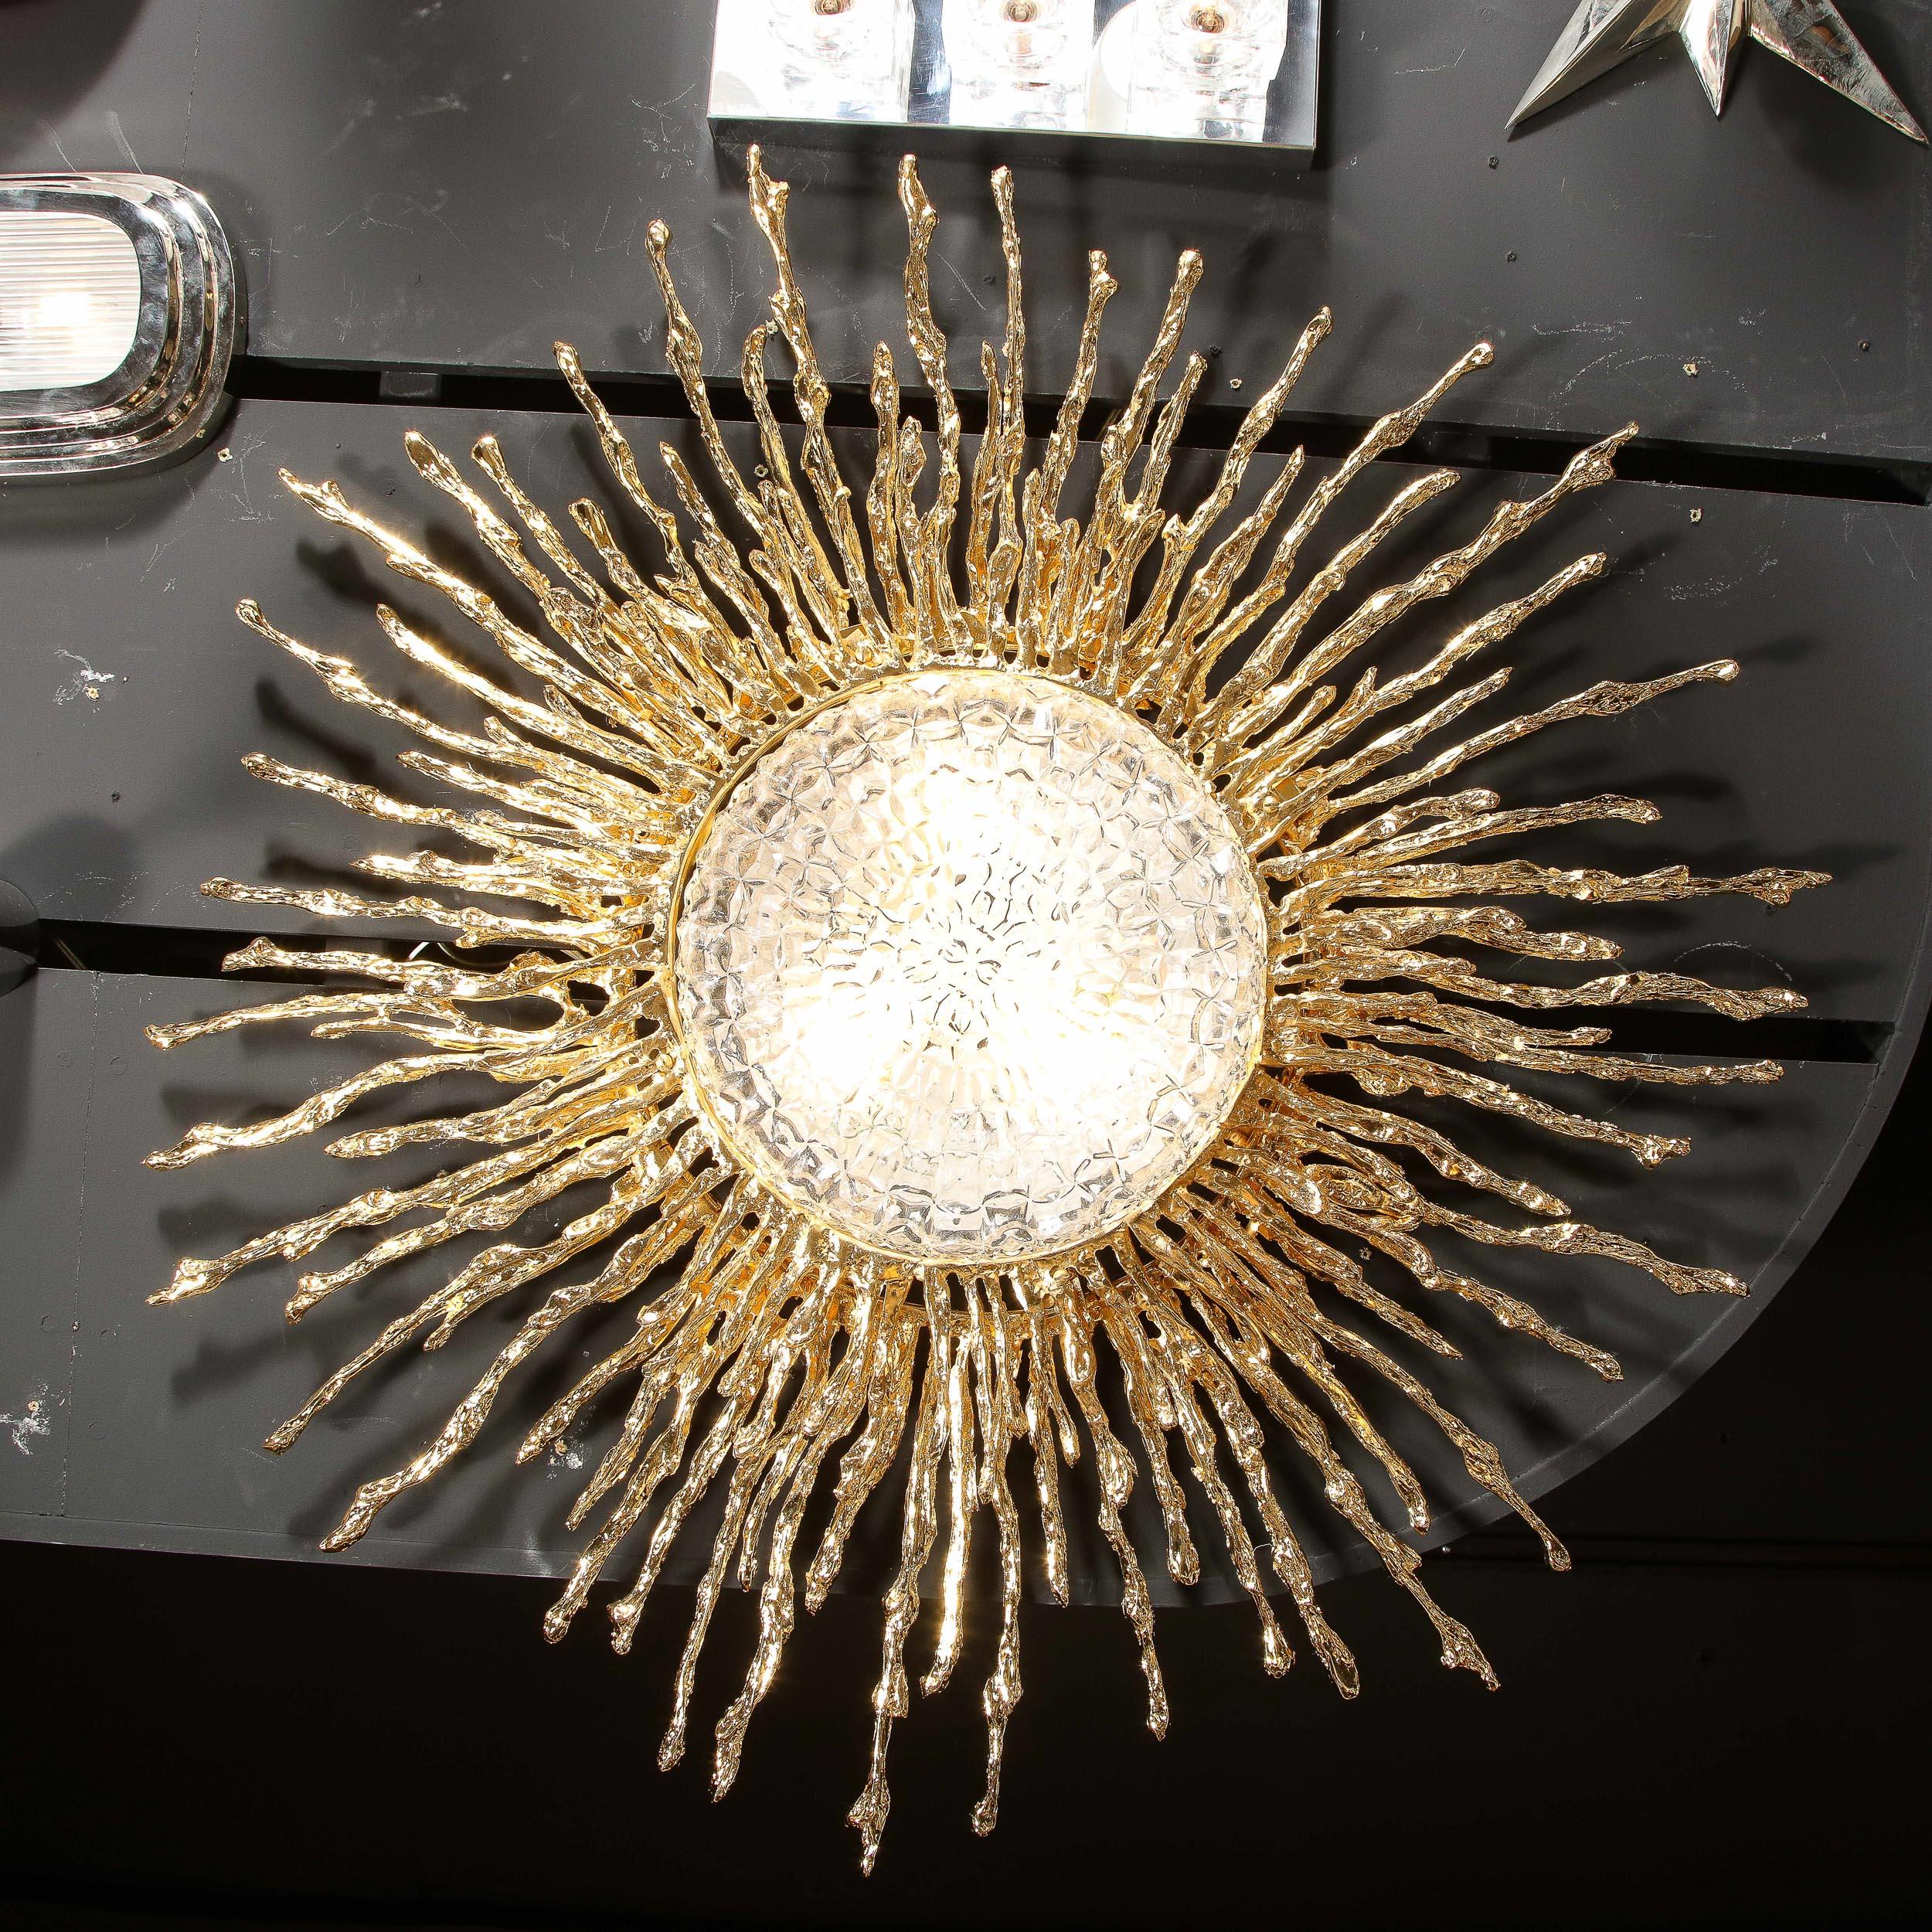 This stunning and dramatic flush mount chandelier was hand crafted by the esteemed artist Claude Boeltz in France. It features an expressionistic sunburst pattern realized in two rows of exploded bronze plated in pure 24-karat yellow gold, the